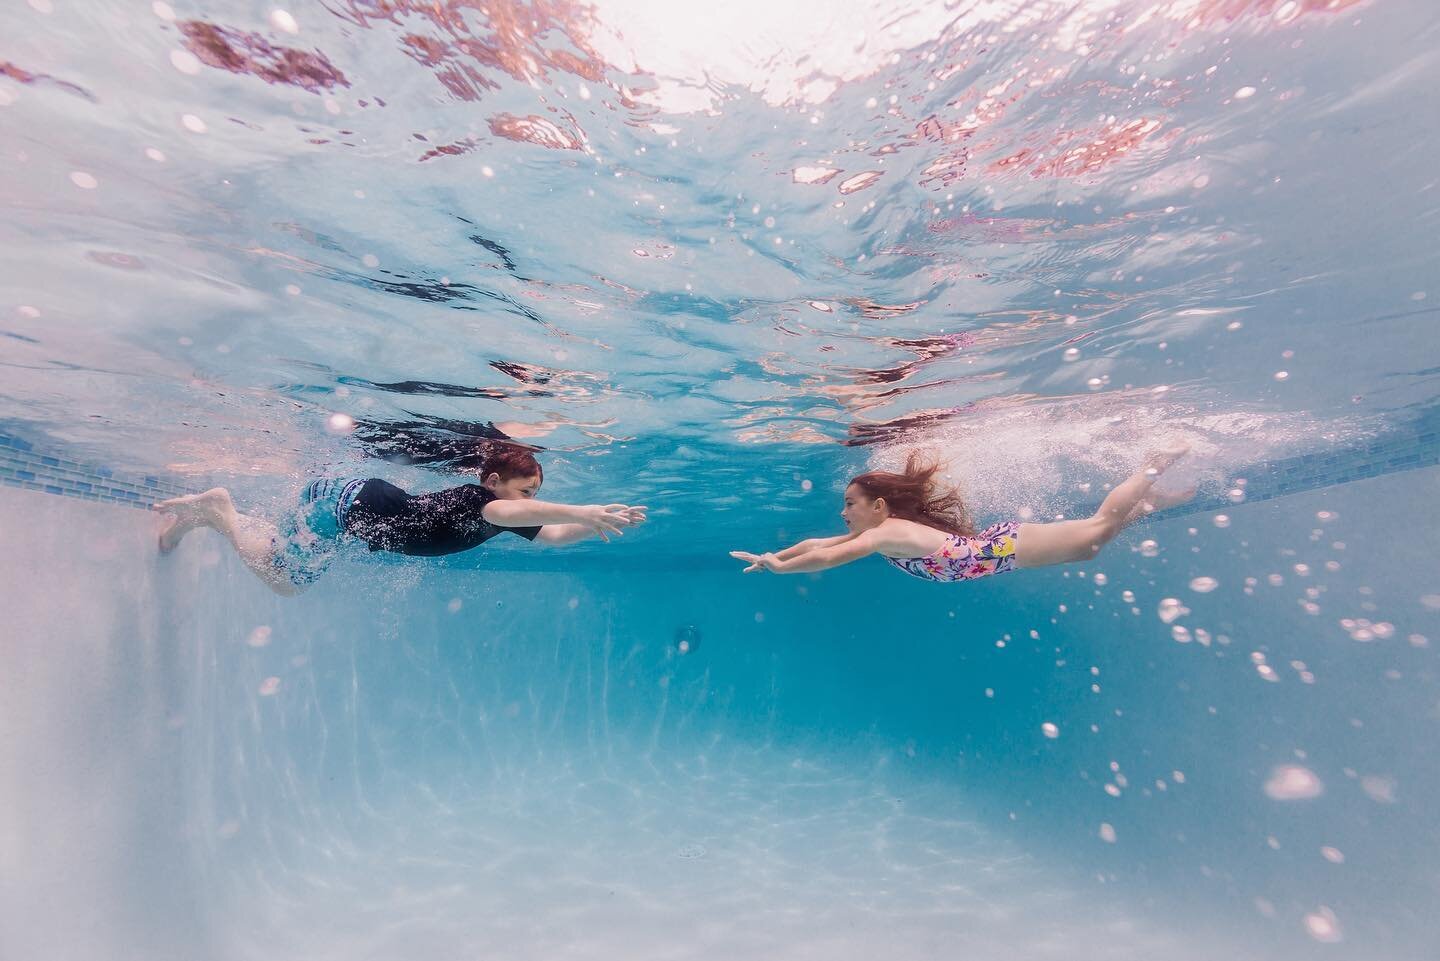 There&rsquo;s something about being underwater that is calming and peaceful, but at the same time exciting and energizing.&nbsp;&nbsp;It definitely brings out the best in children - the way they play together in the pool is the most fun and creates m